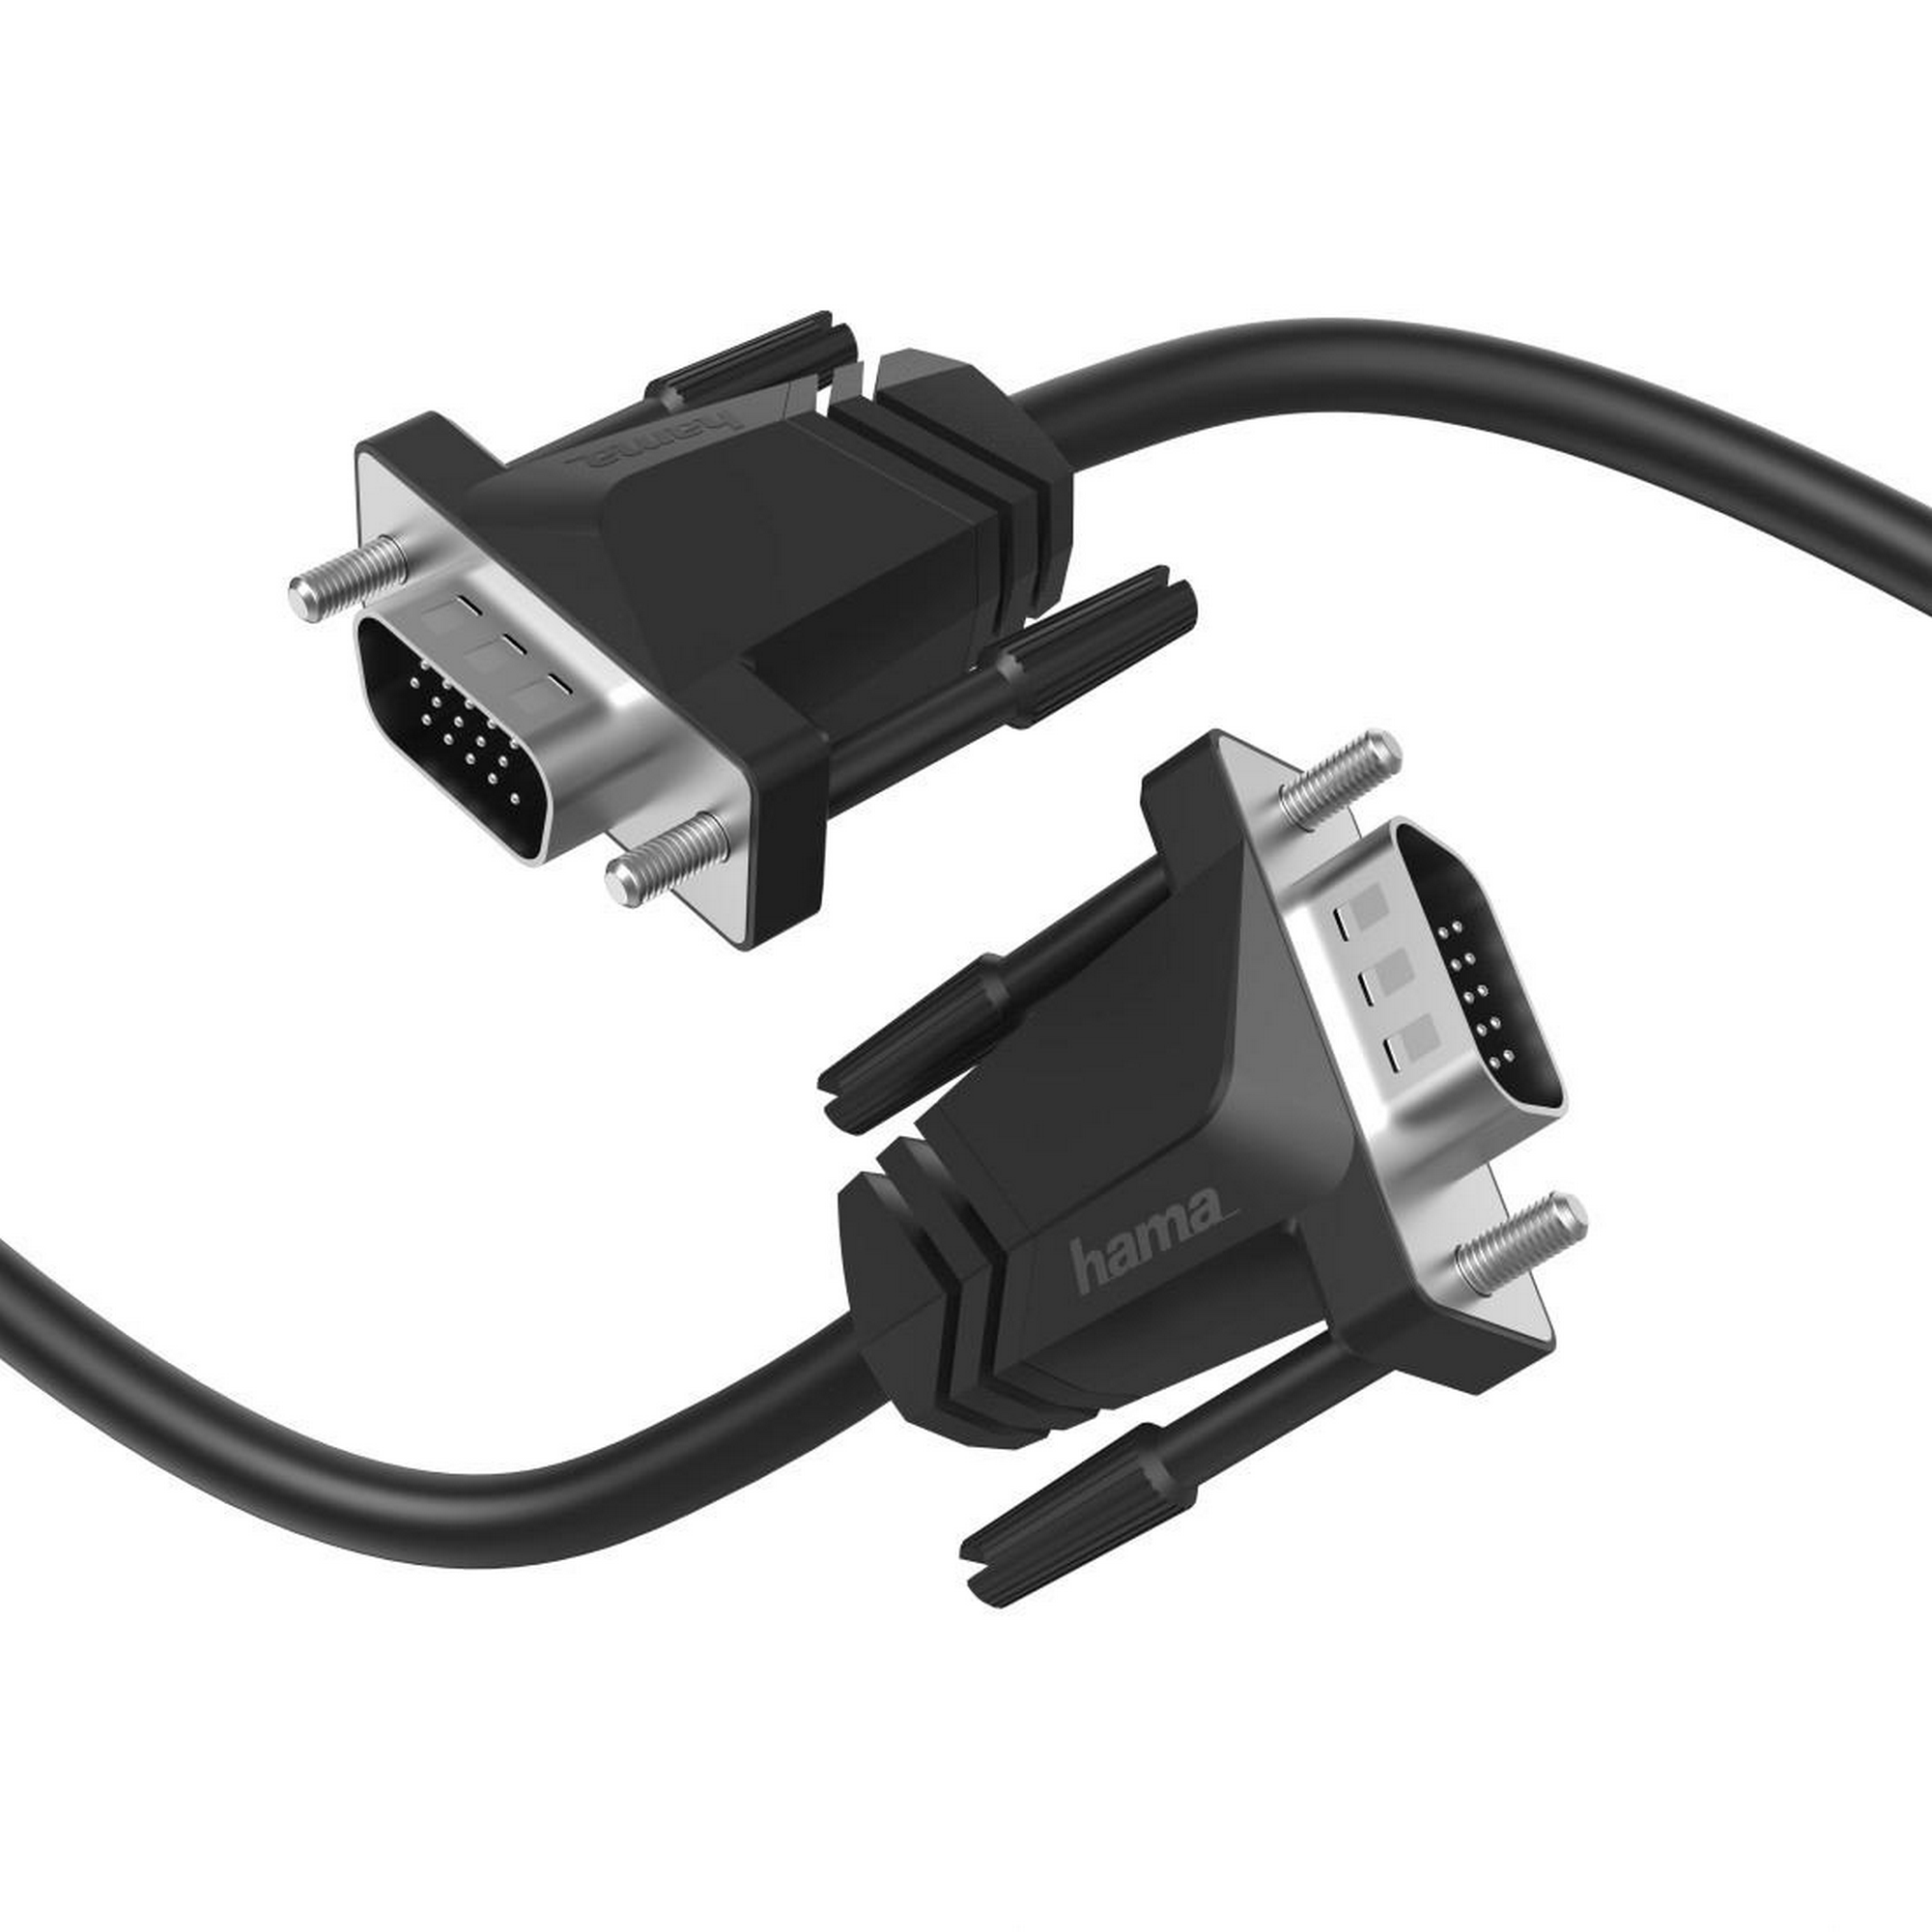 VGA-Kabel 'Essential Line' Full-HD 1080p schwarz 1,5 m + product picture